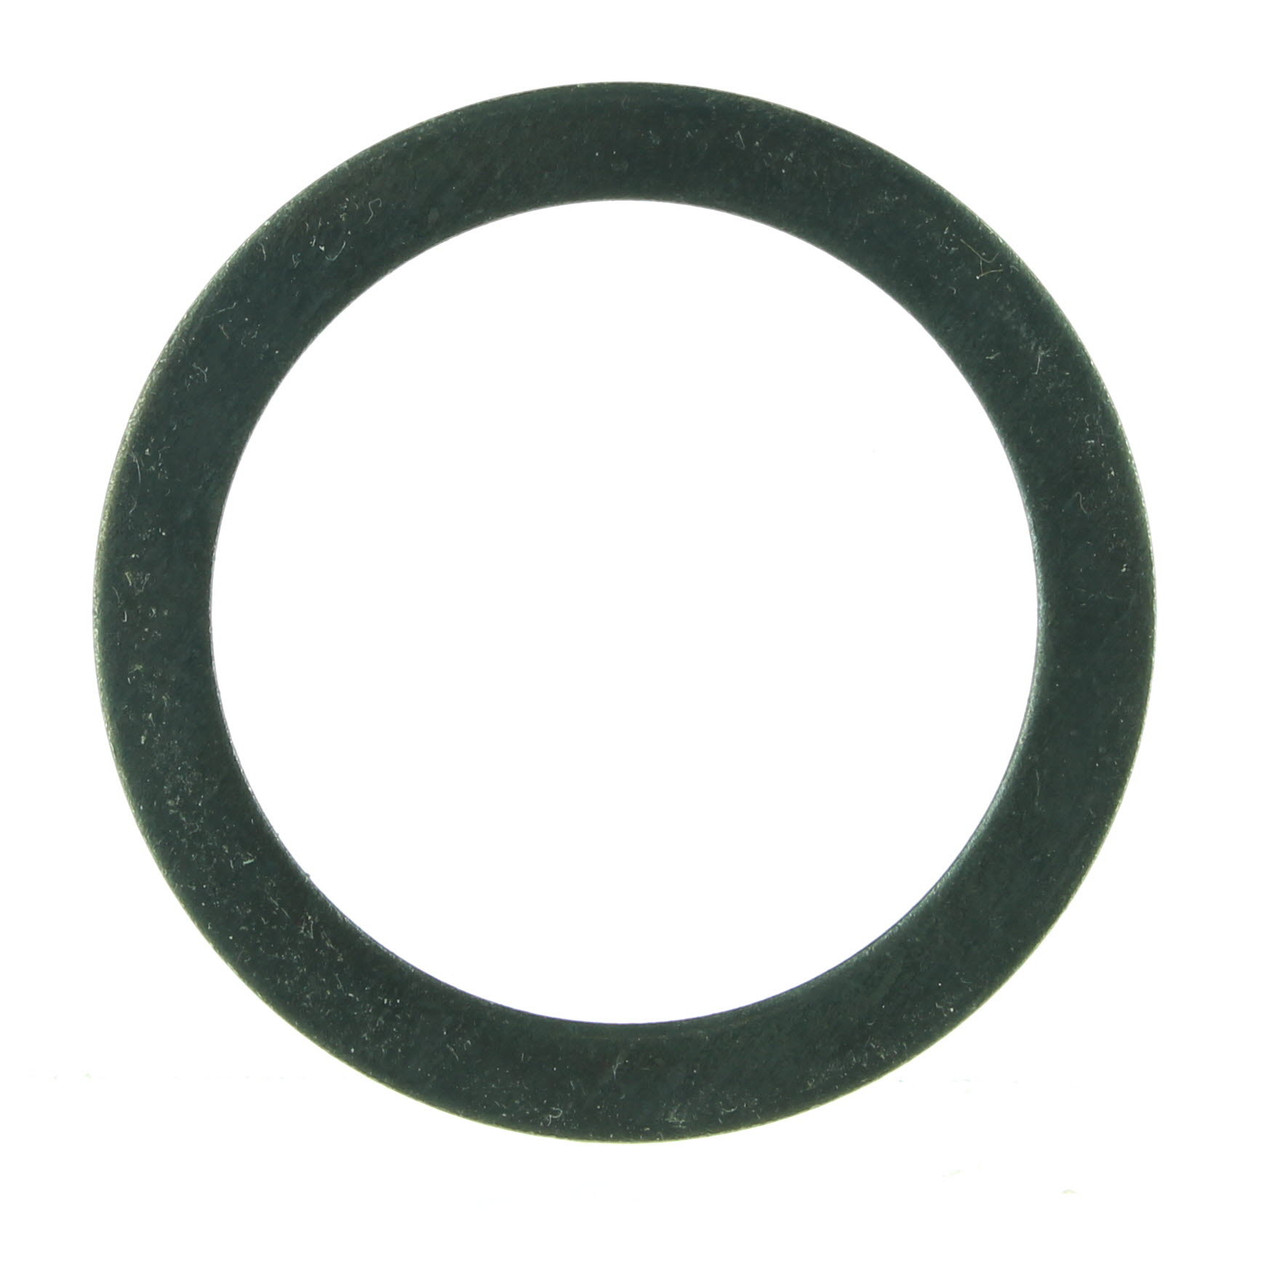 Ski-Doo New OEM Washer Renegade Expedition Grand Touring, Pack Of 3, 504152689